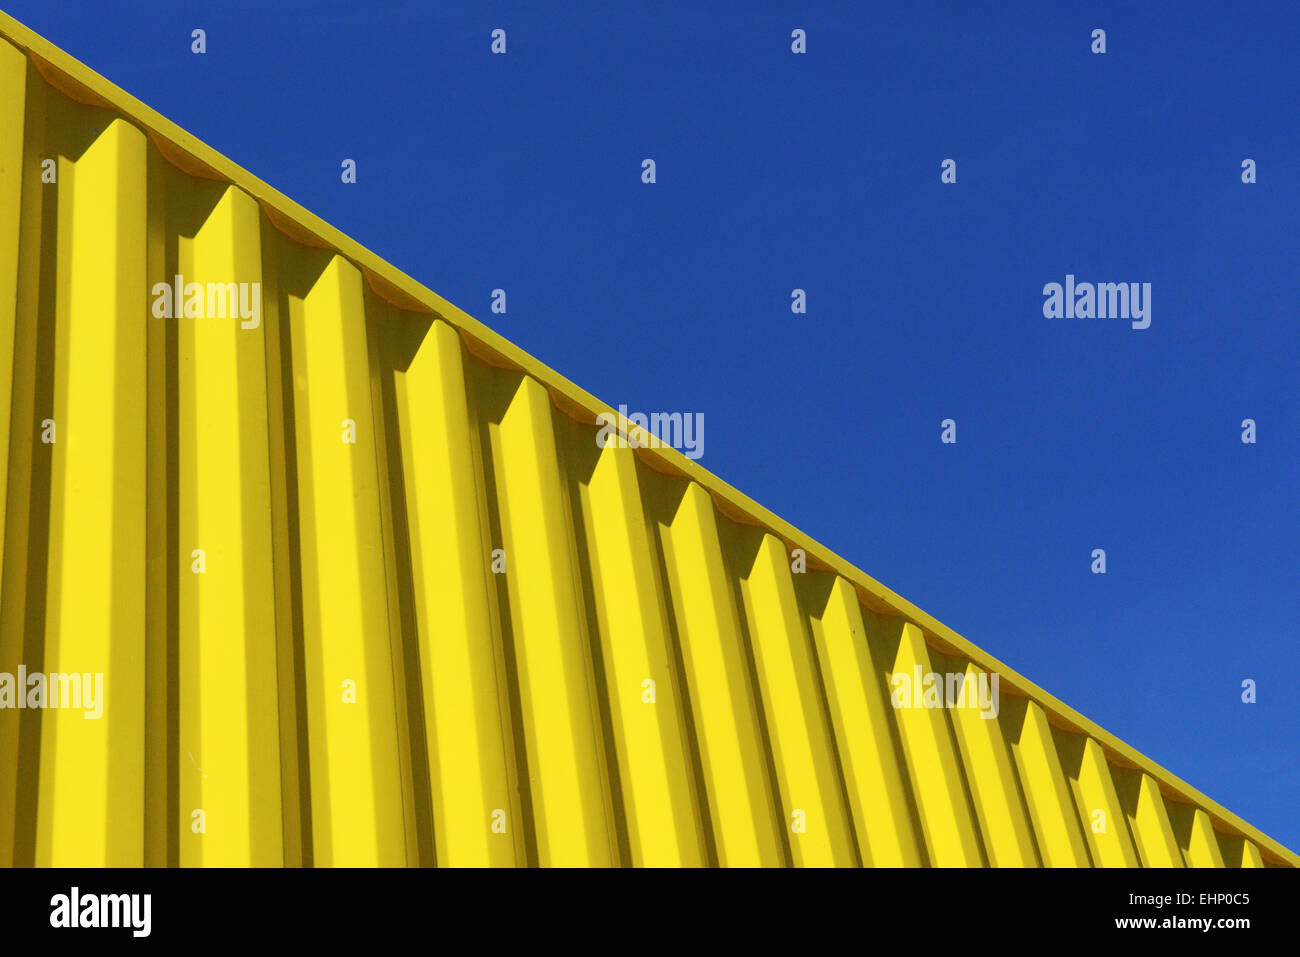 Bright Yellow shipping container juxtaposed against a bright blue sky Stock Photo